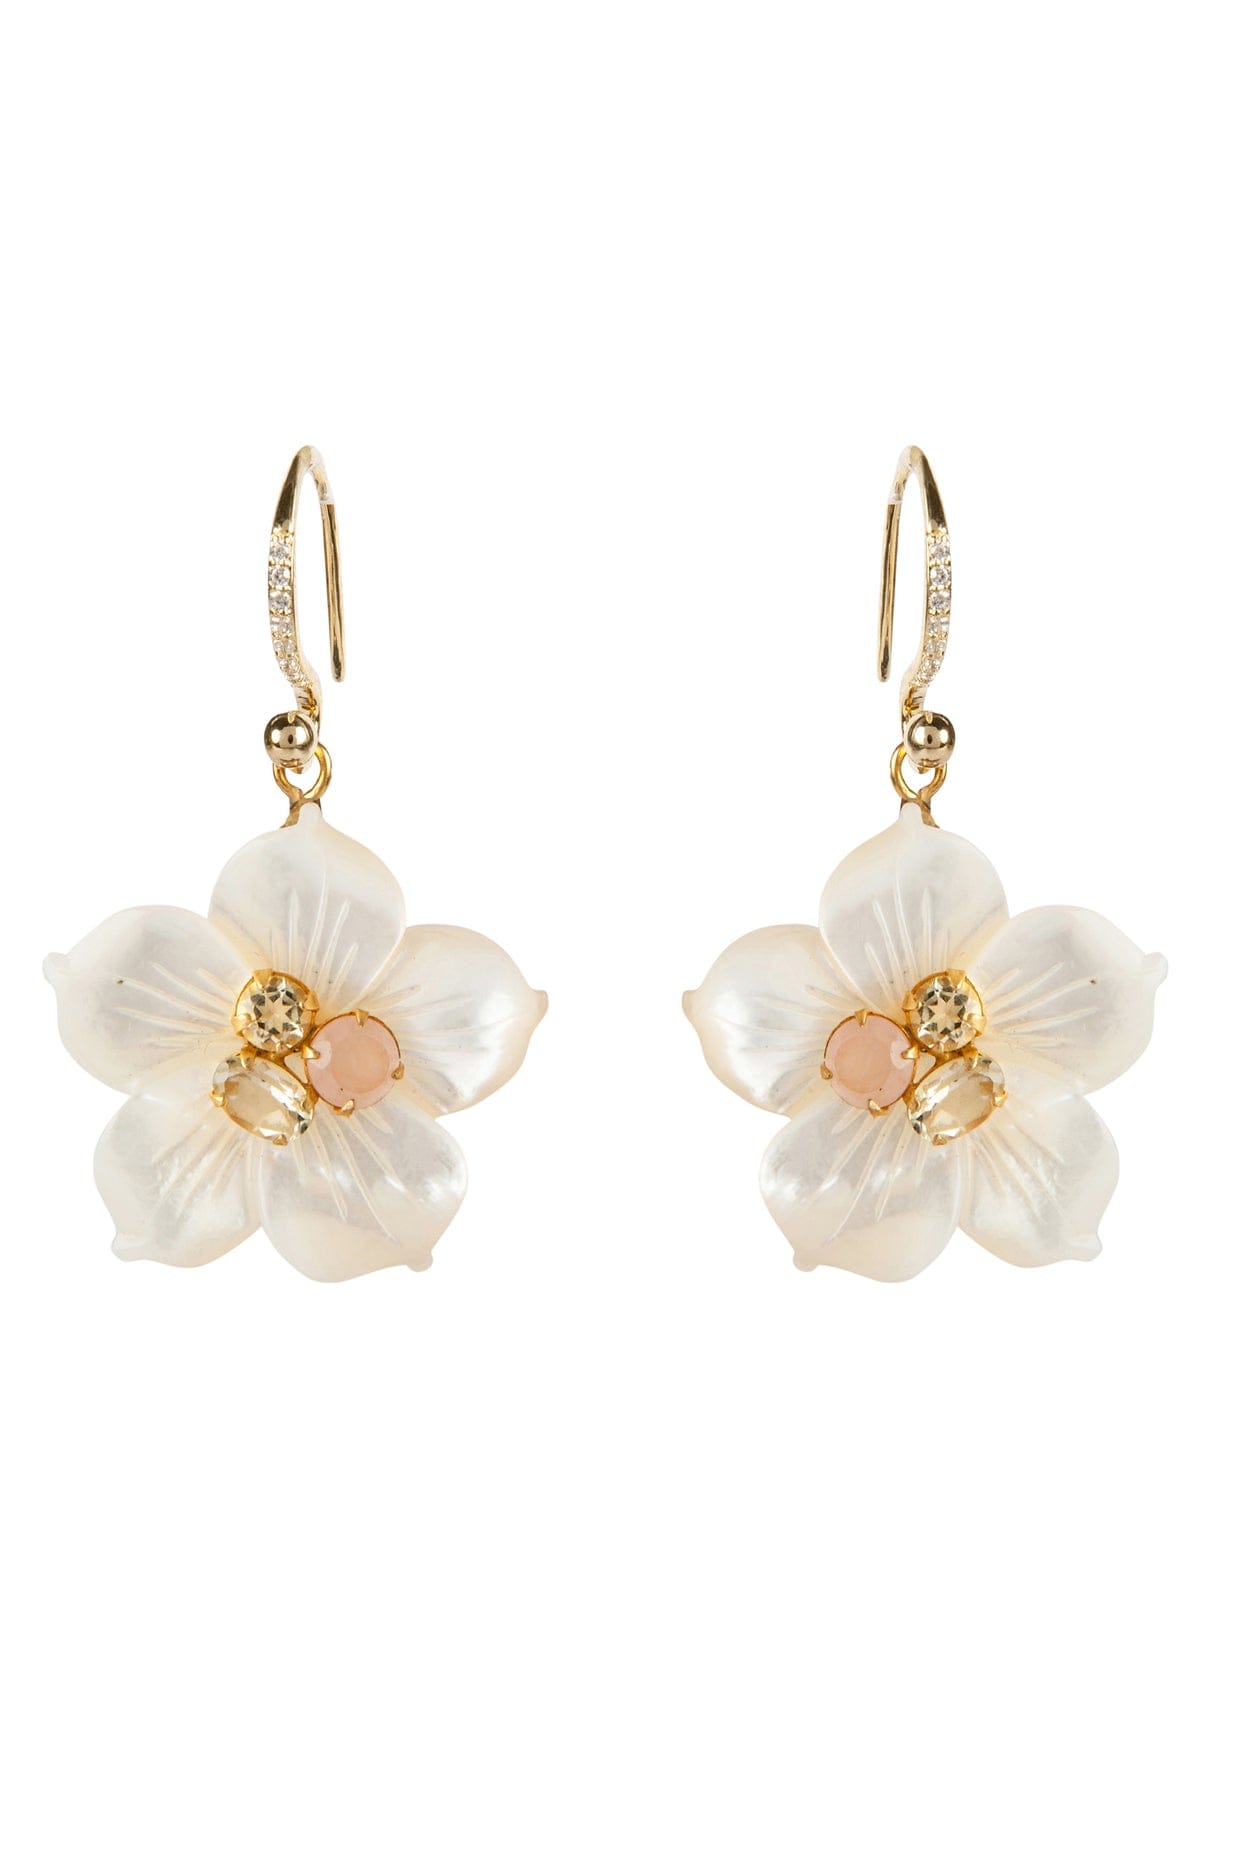 BOUNKIT JEWELRY-Carved Mother of Pearl Flower Drop Earrings-GOLD